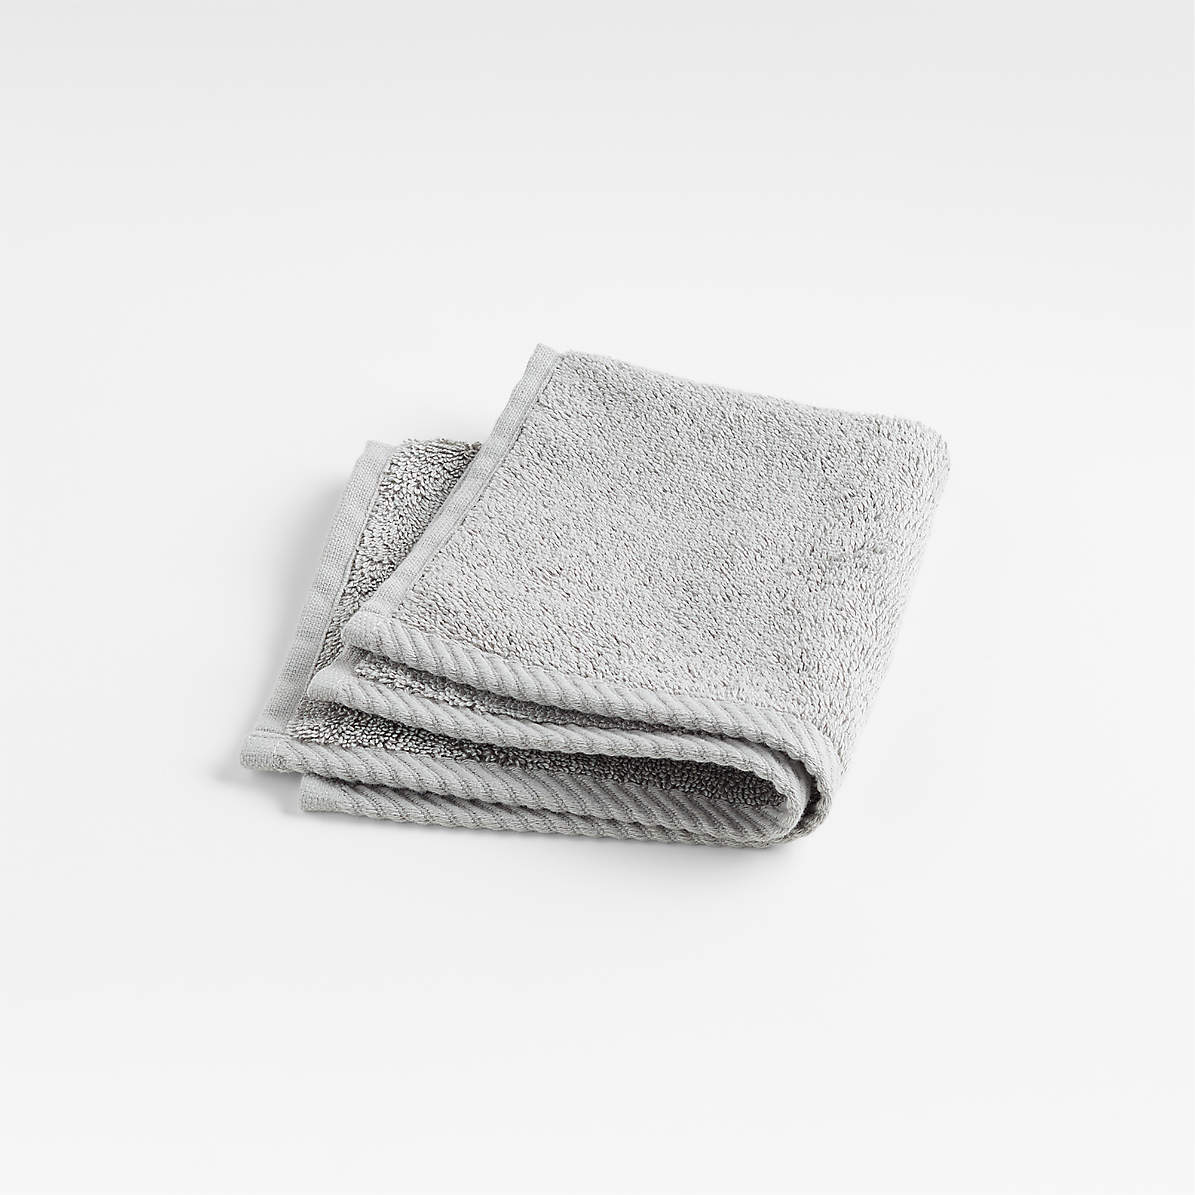 Find 3-Pack Washcloths  Grey Chevron/White Solid/Grey Solid Kushies at  cheap cost